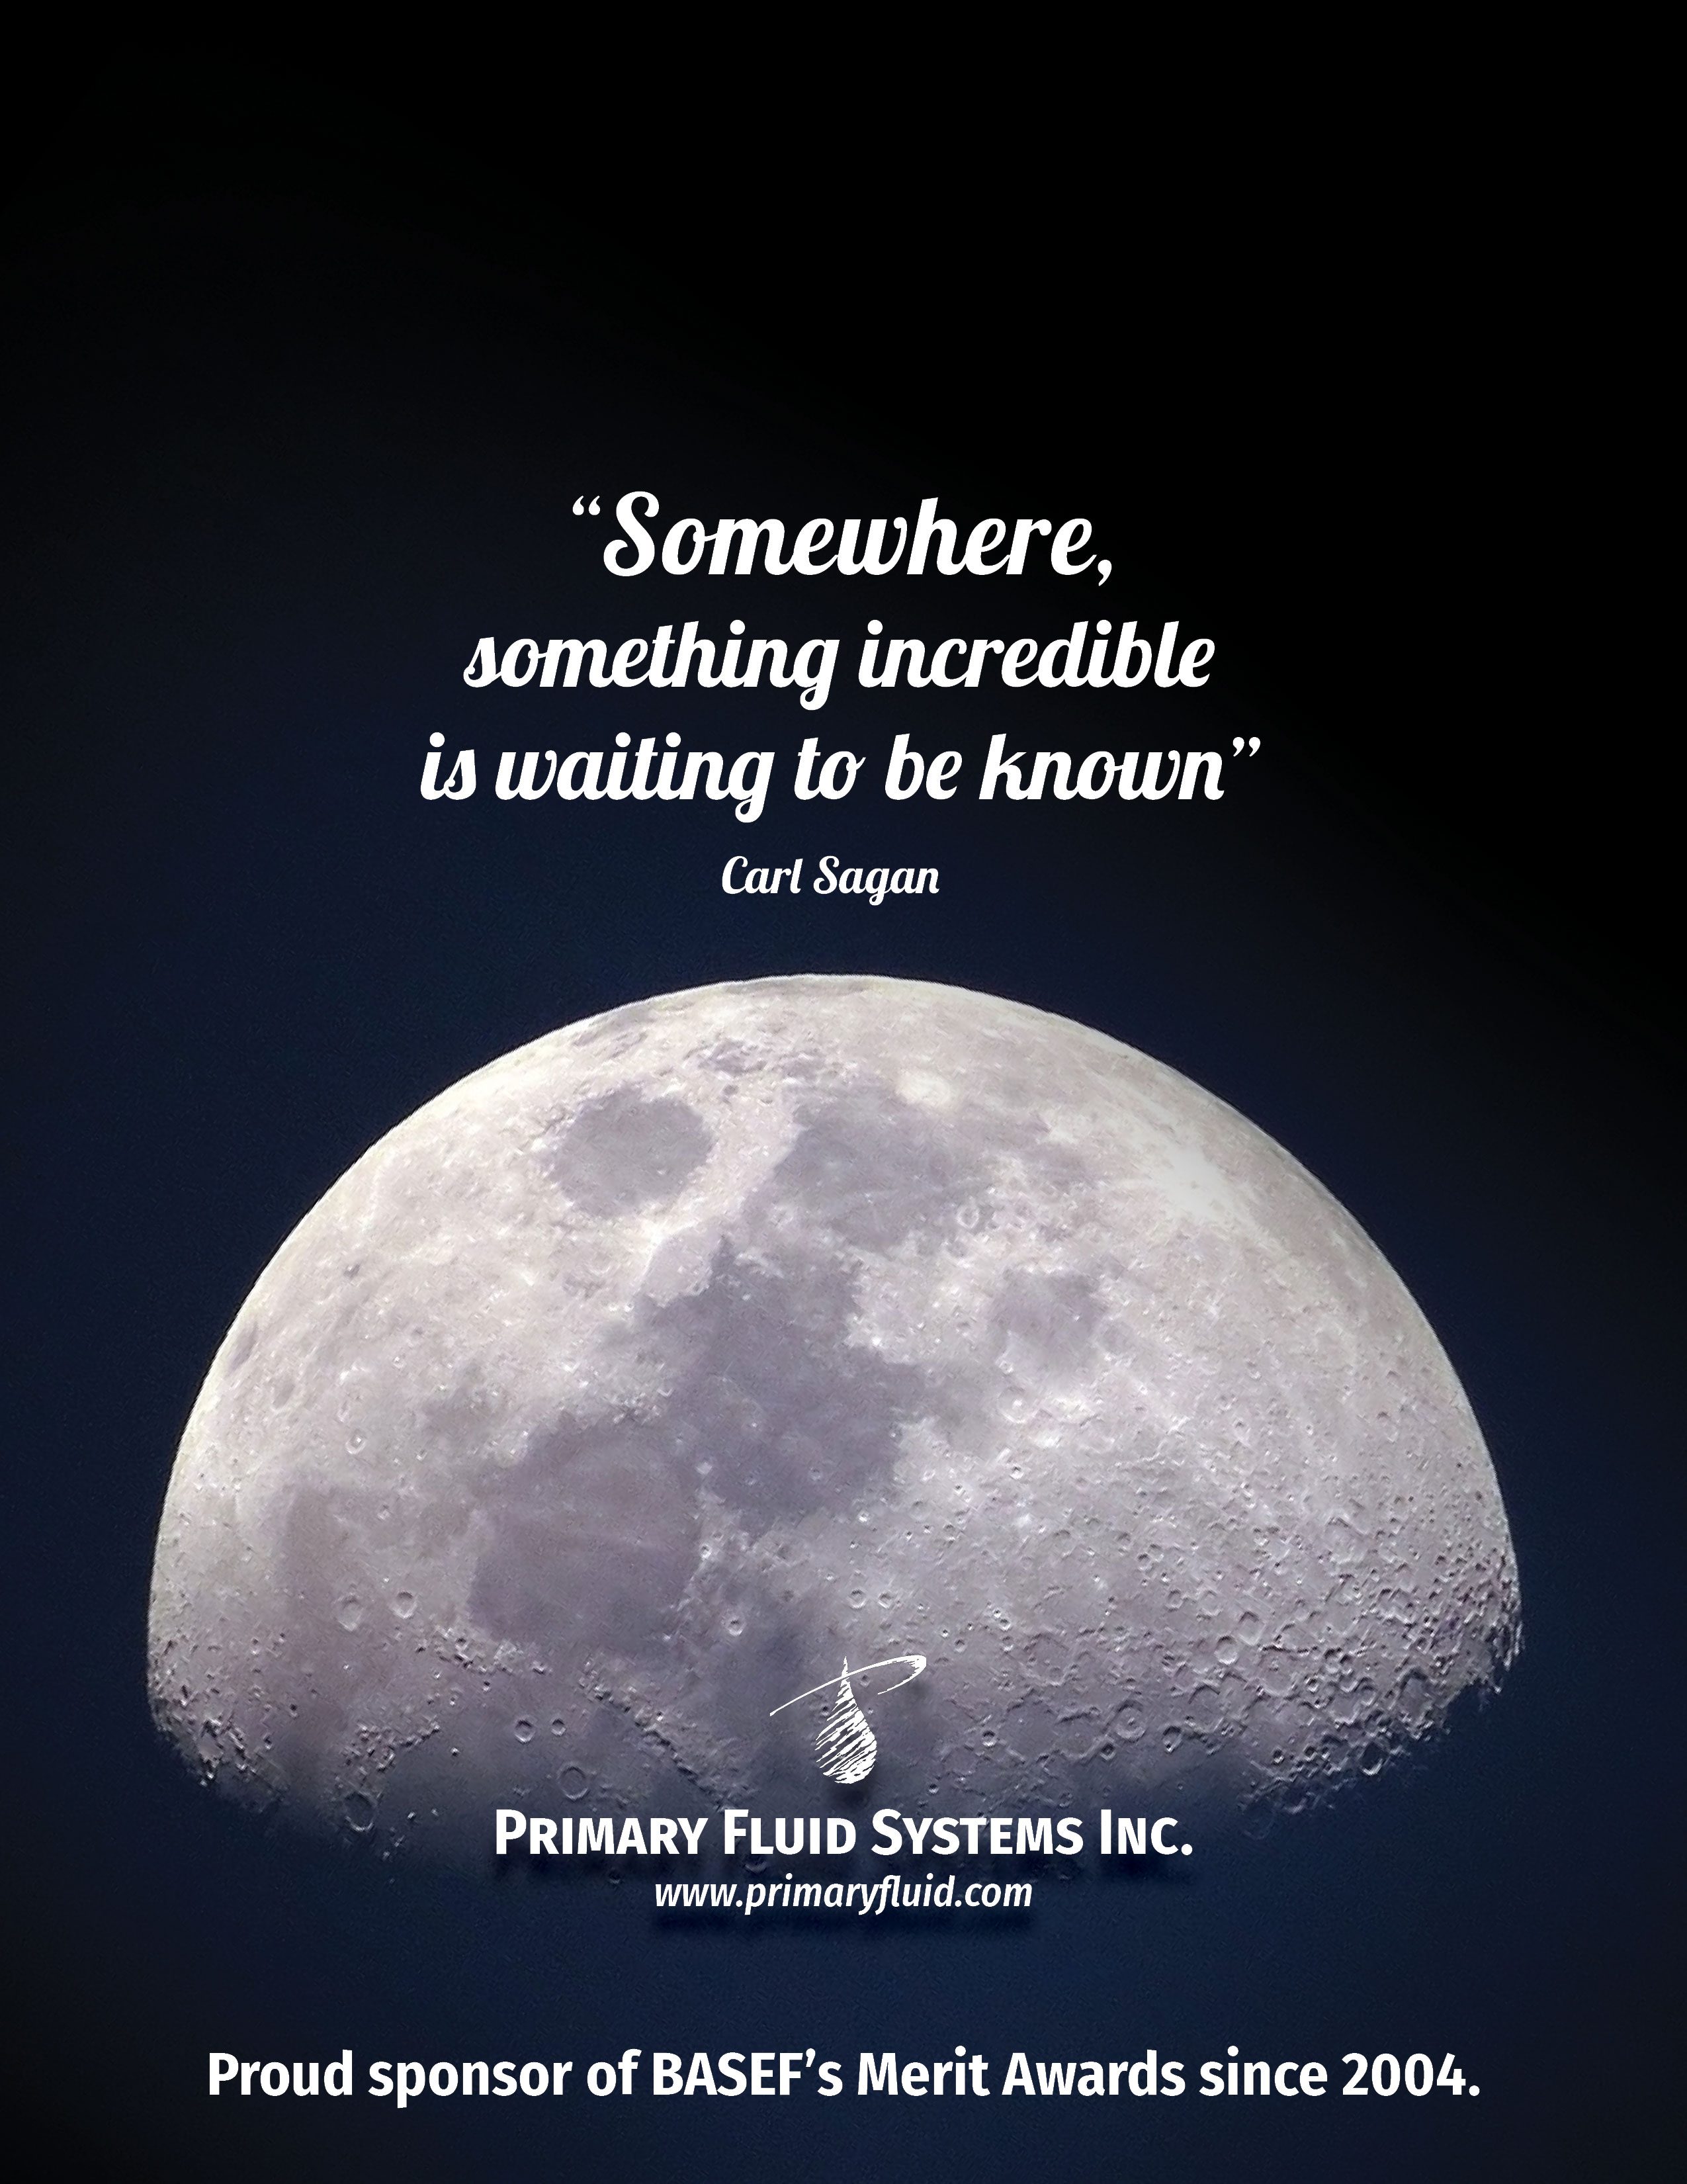 Carl Sagan quote Somewhere, something incredible is waiting to be known.